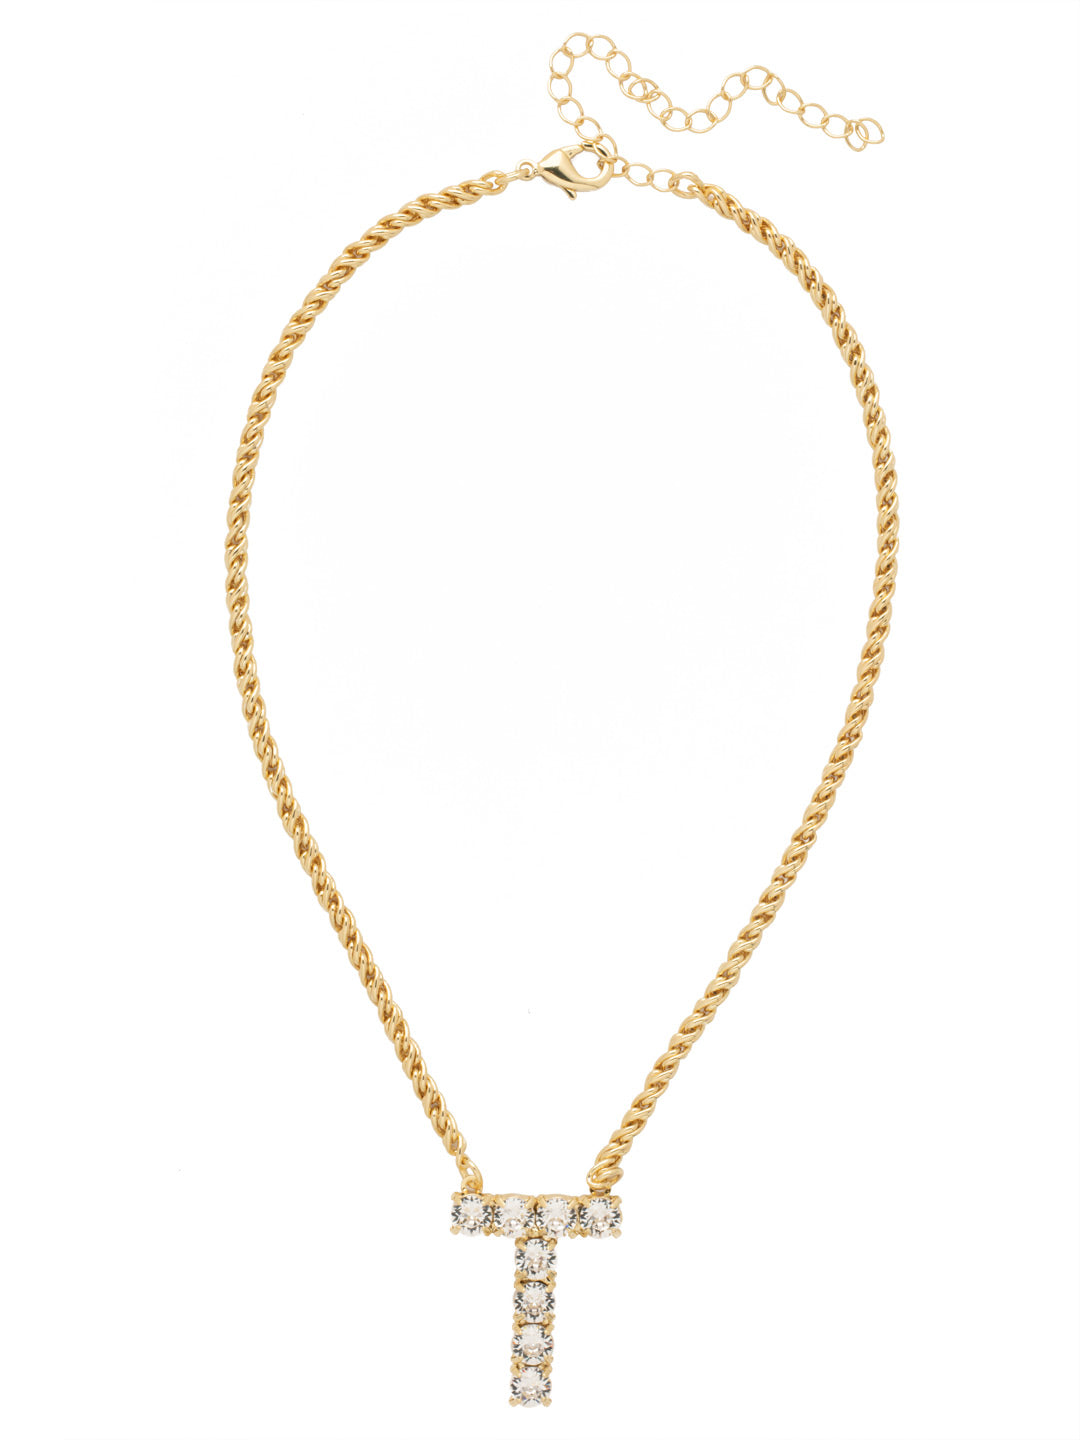 T Initial Rope Pendant Necklace - NFK39BGCRY - <p>The Initial Rope Pendant Necklace features a crystal encrusted metal monogram pendant on an adjustable rope chain, secured with a lobster claw clasp. From Sorrelli's Crystal collection in our Bright Gold-tone finish.</p>